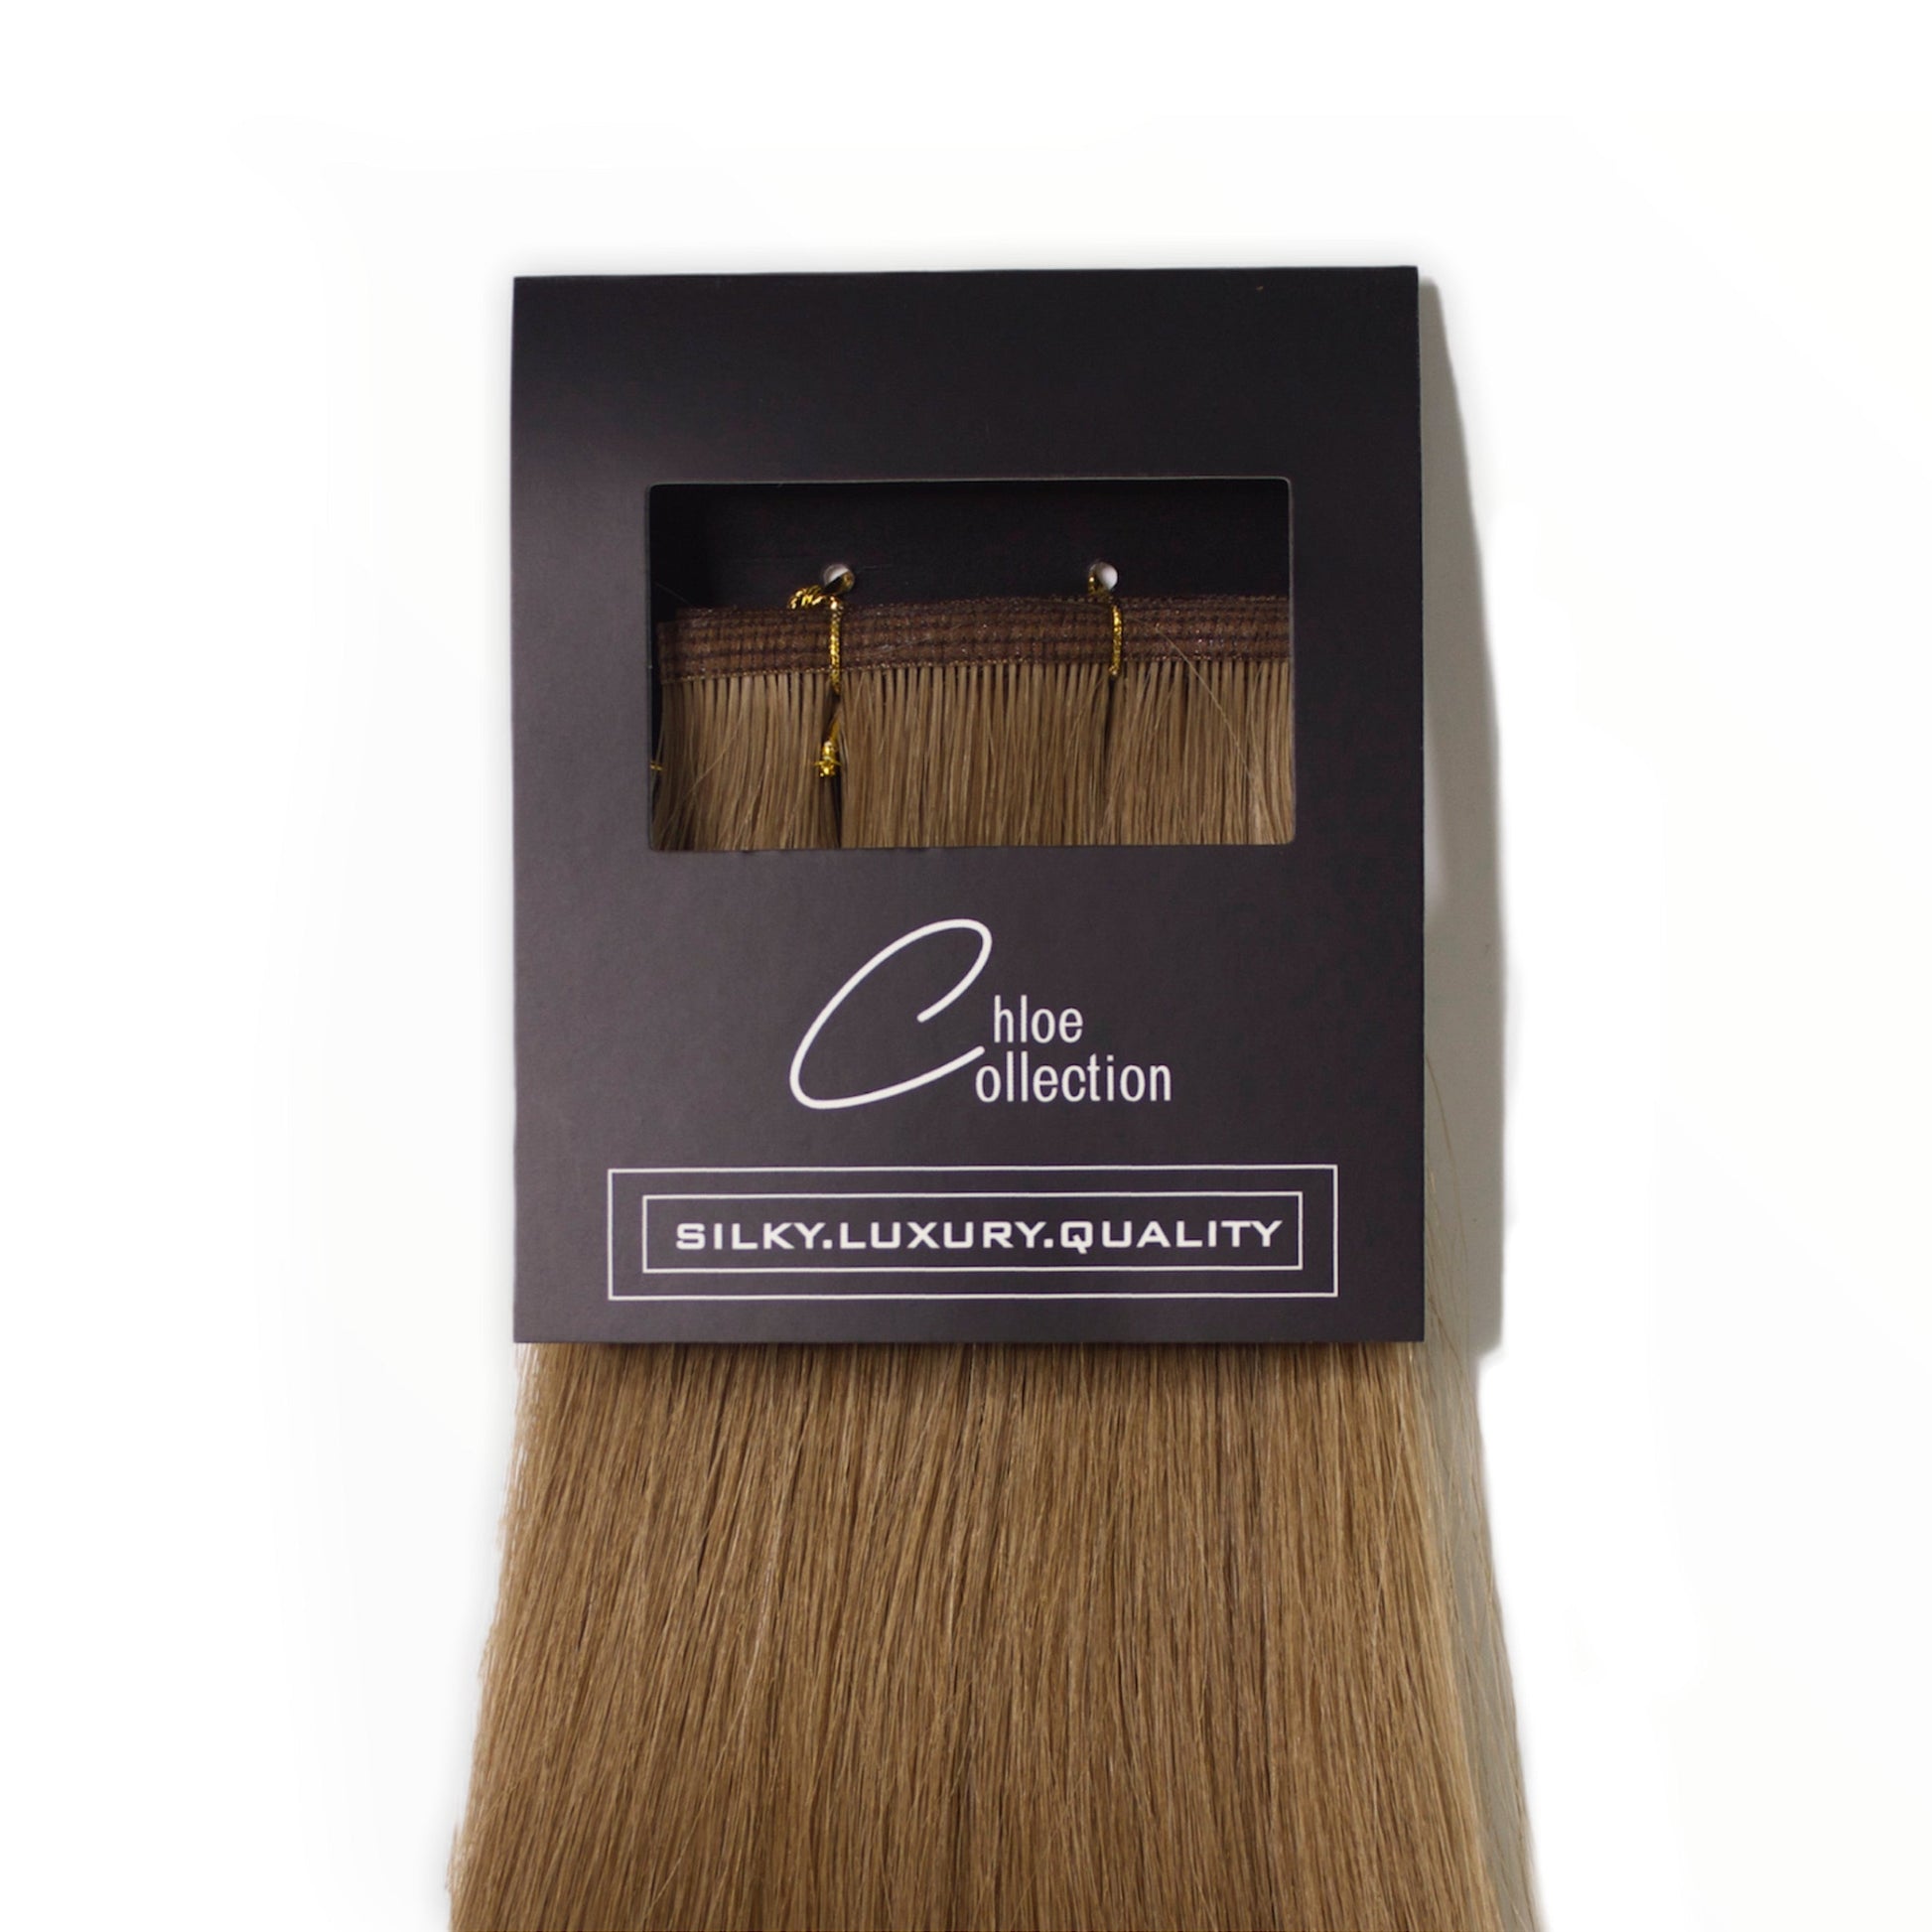 Chloe Collection - Thin weft 18" #8 - 60g.